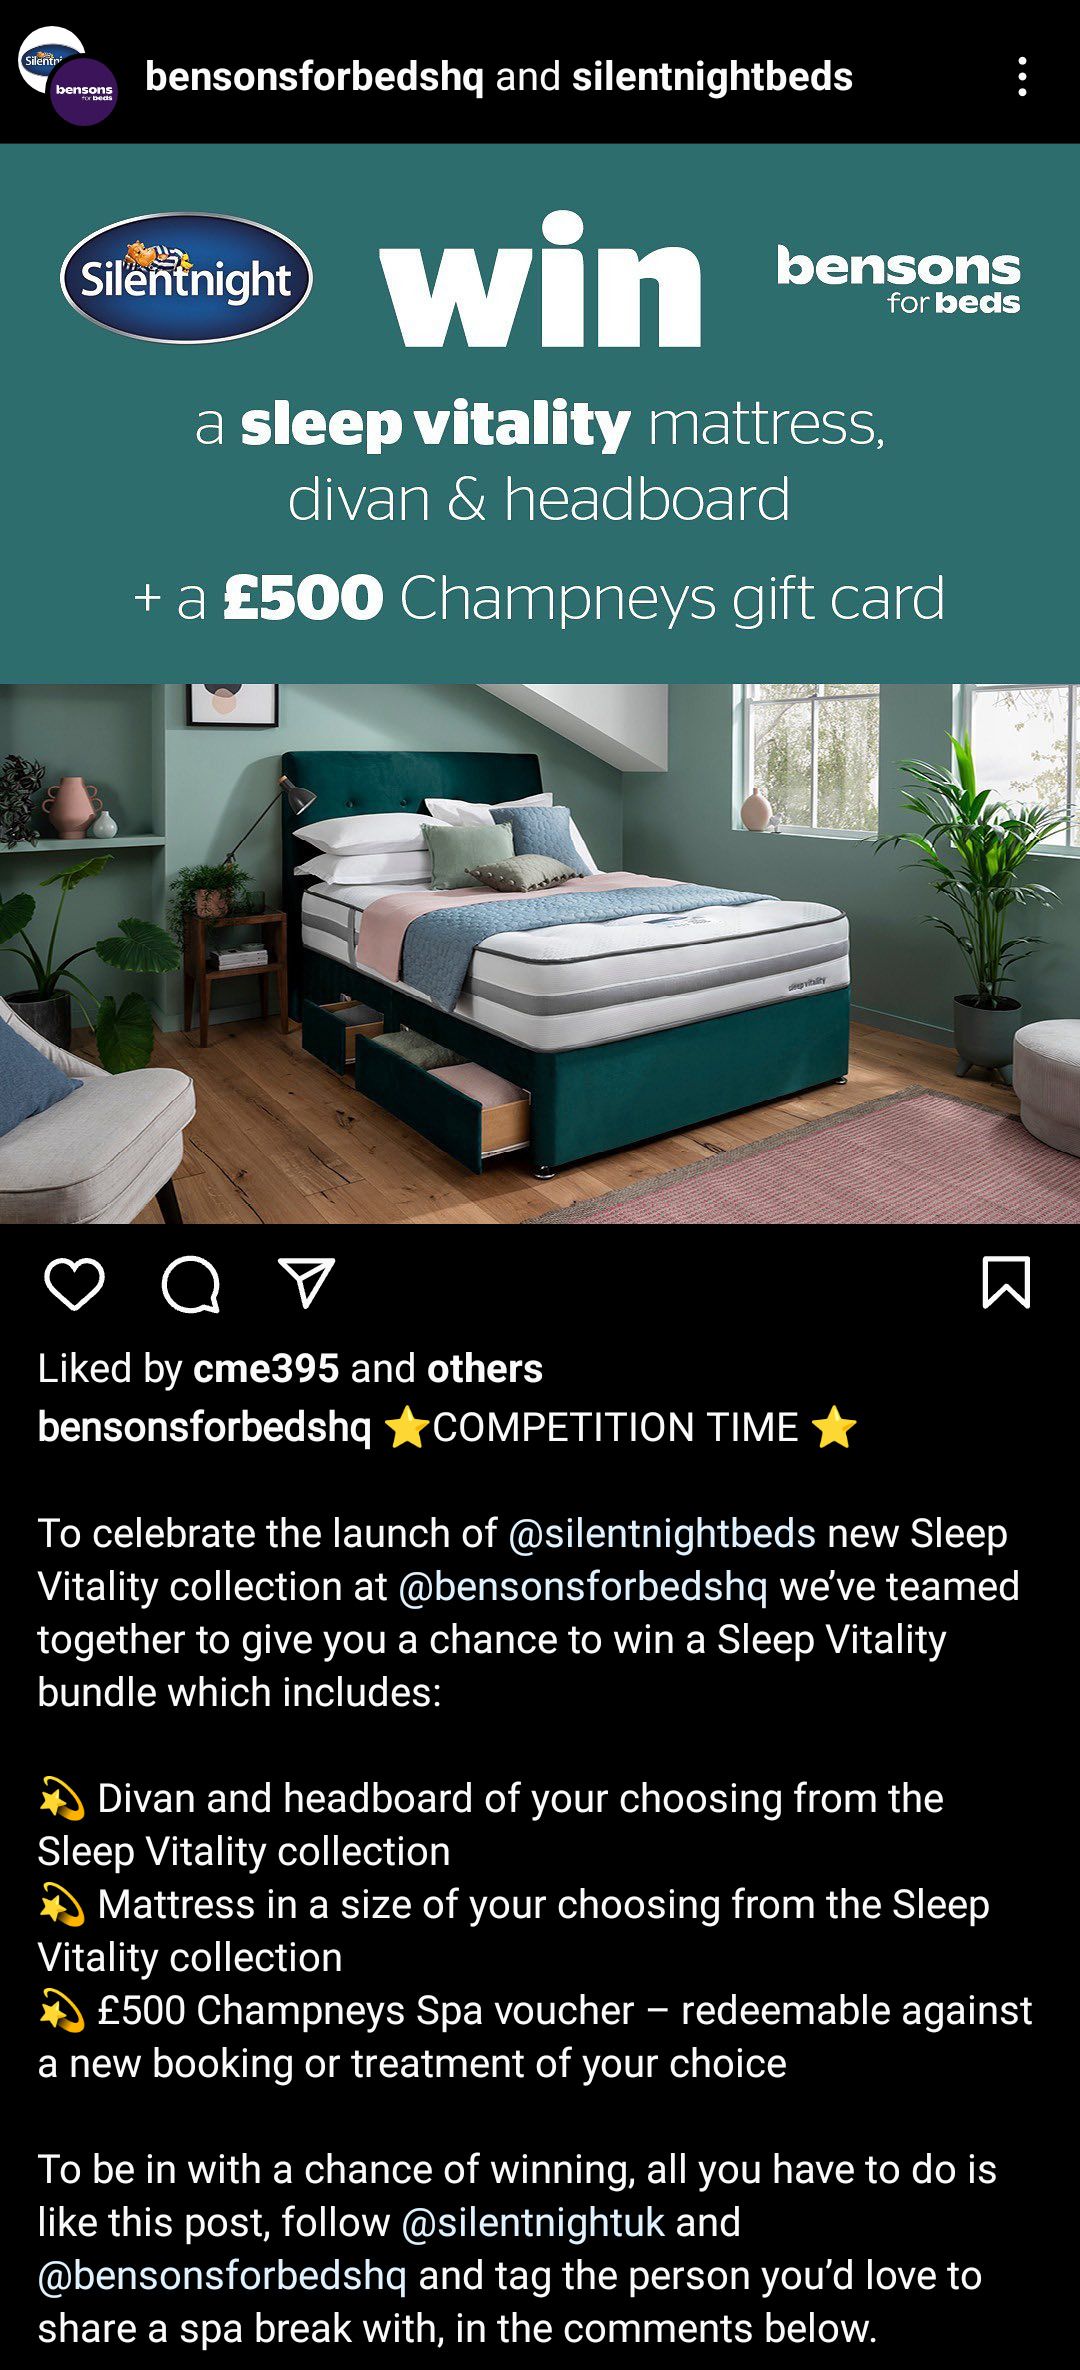 Image of Instagram post with image of a bed and text detailing competition rules